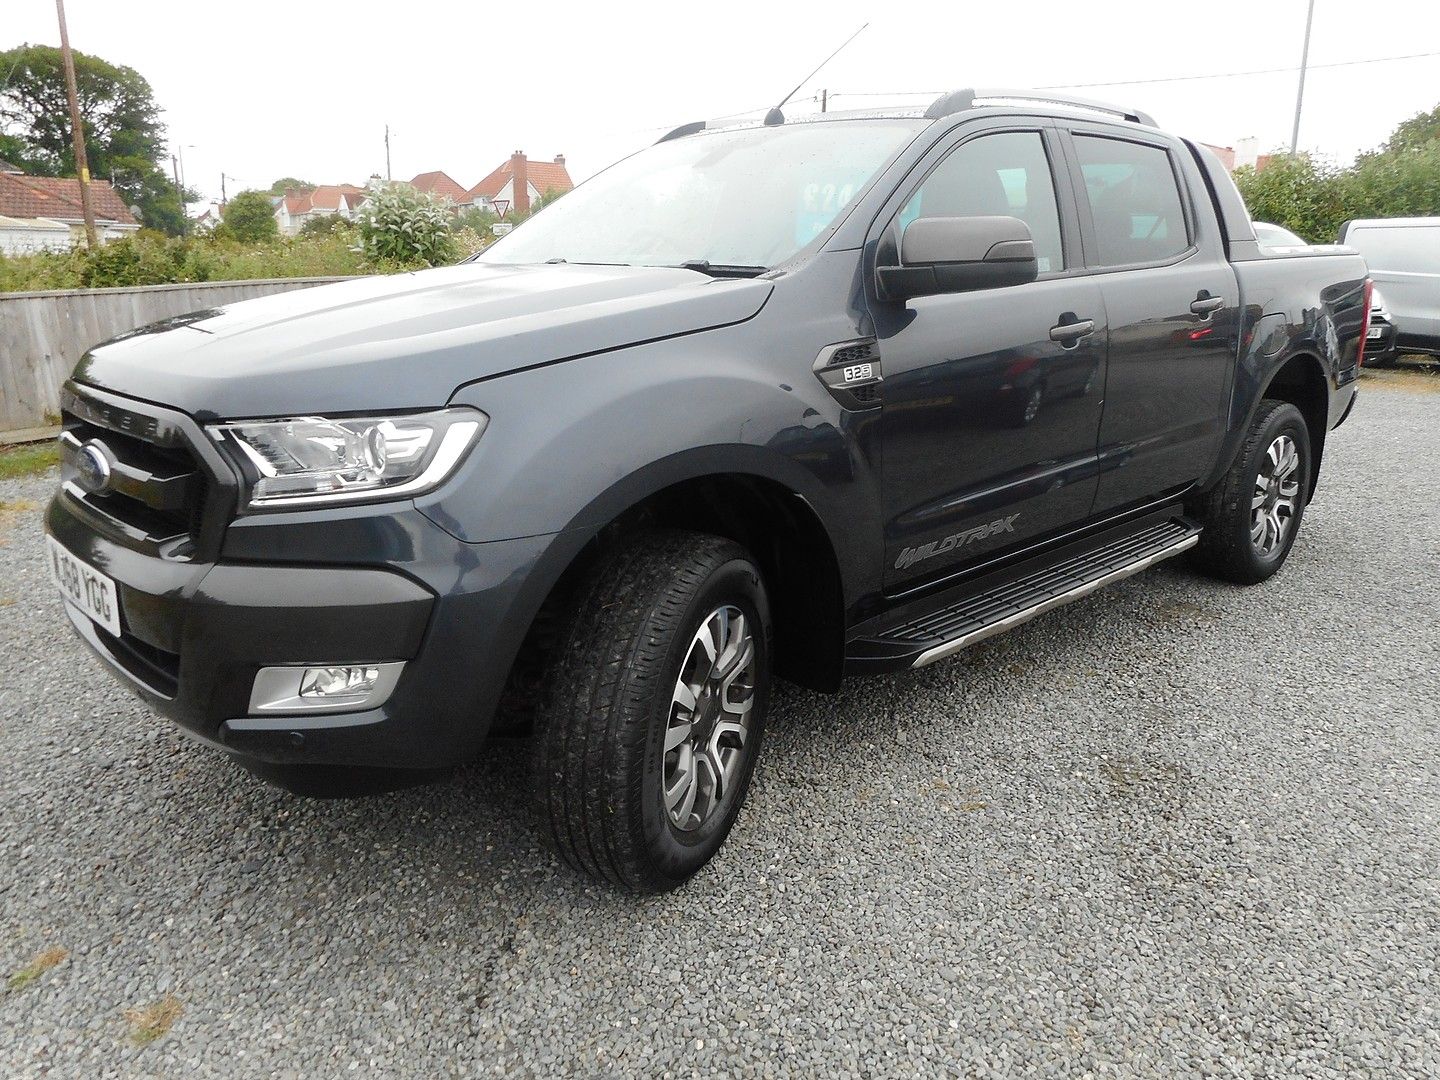 FORD Ranger Double Cab 4x4 Wildtrak 3.2TDCi 200PS (2018) - Picture 5